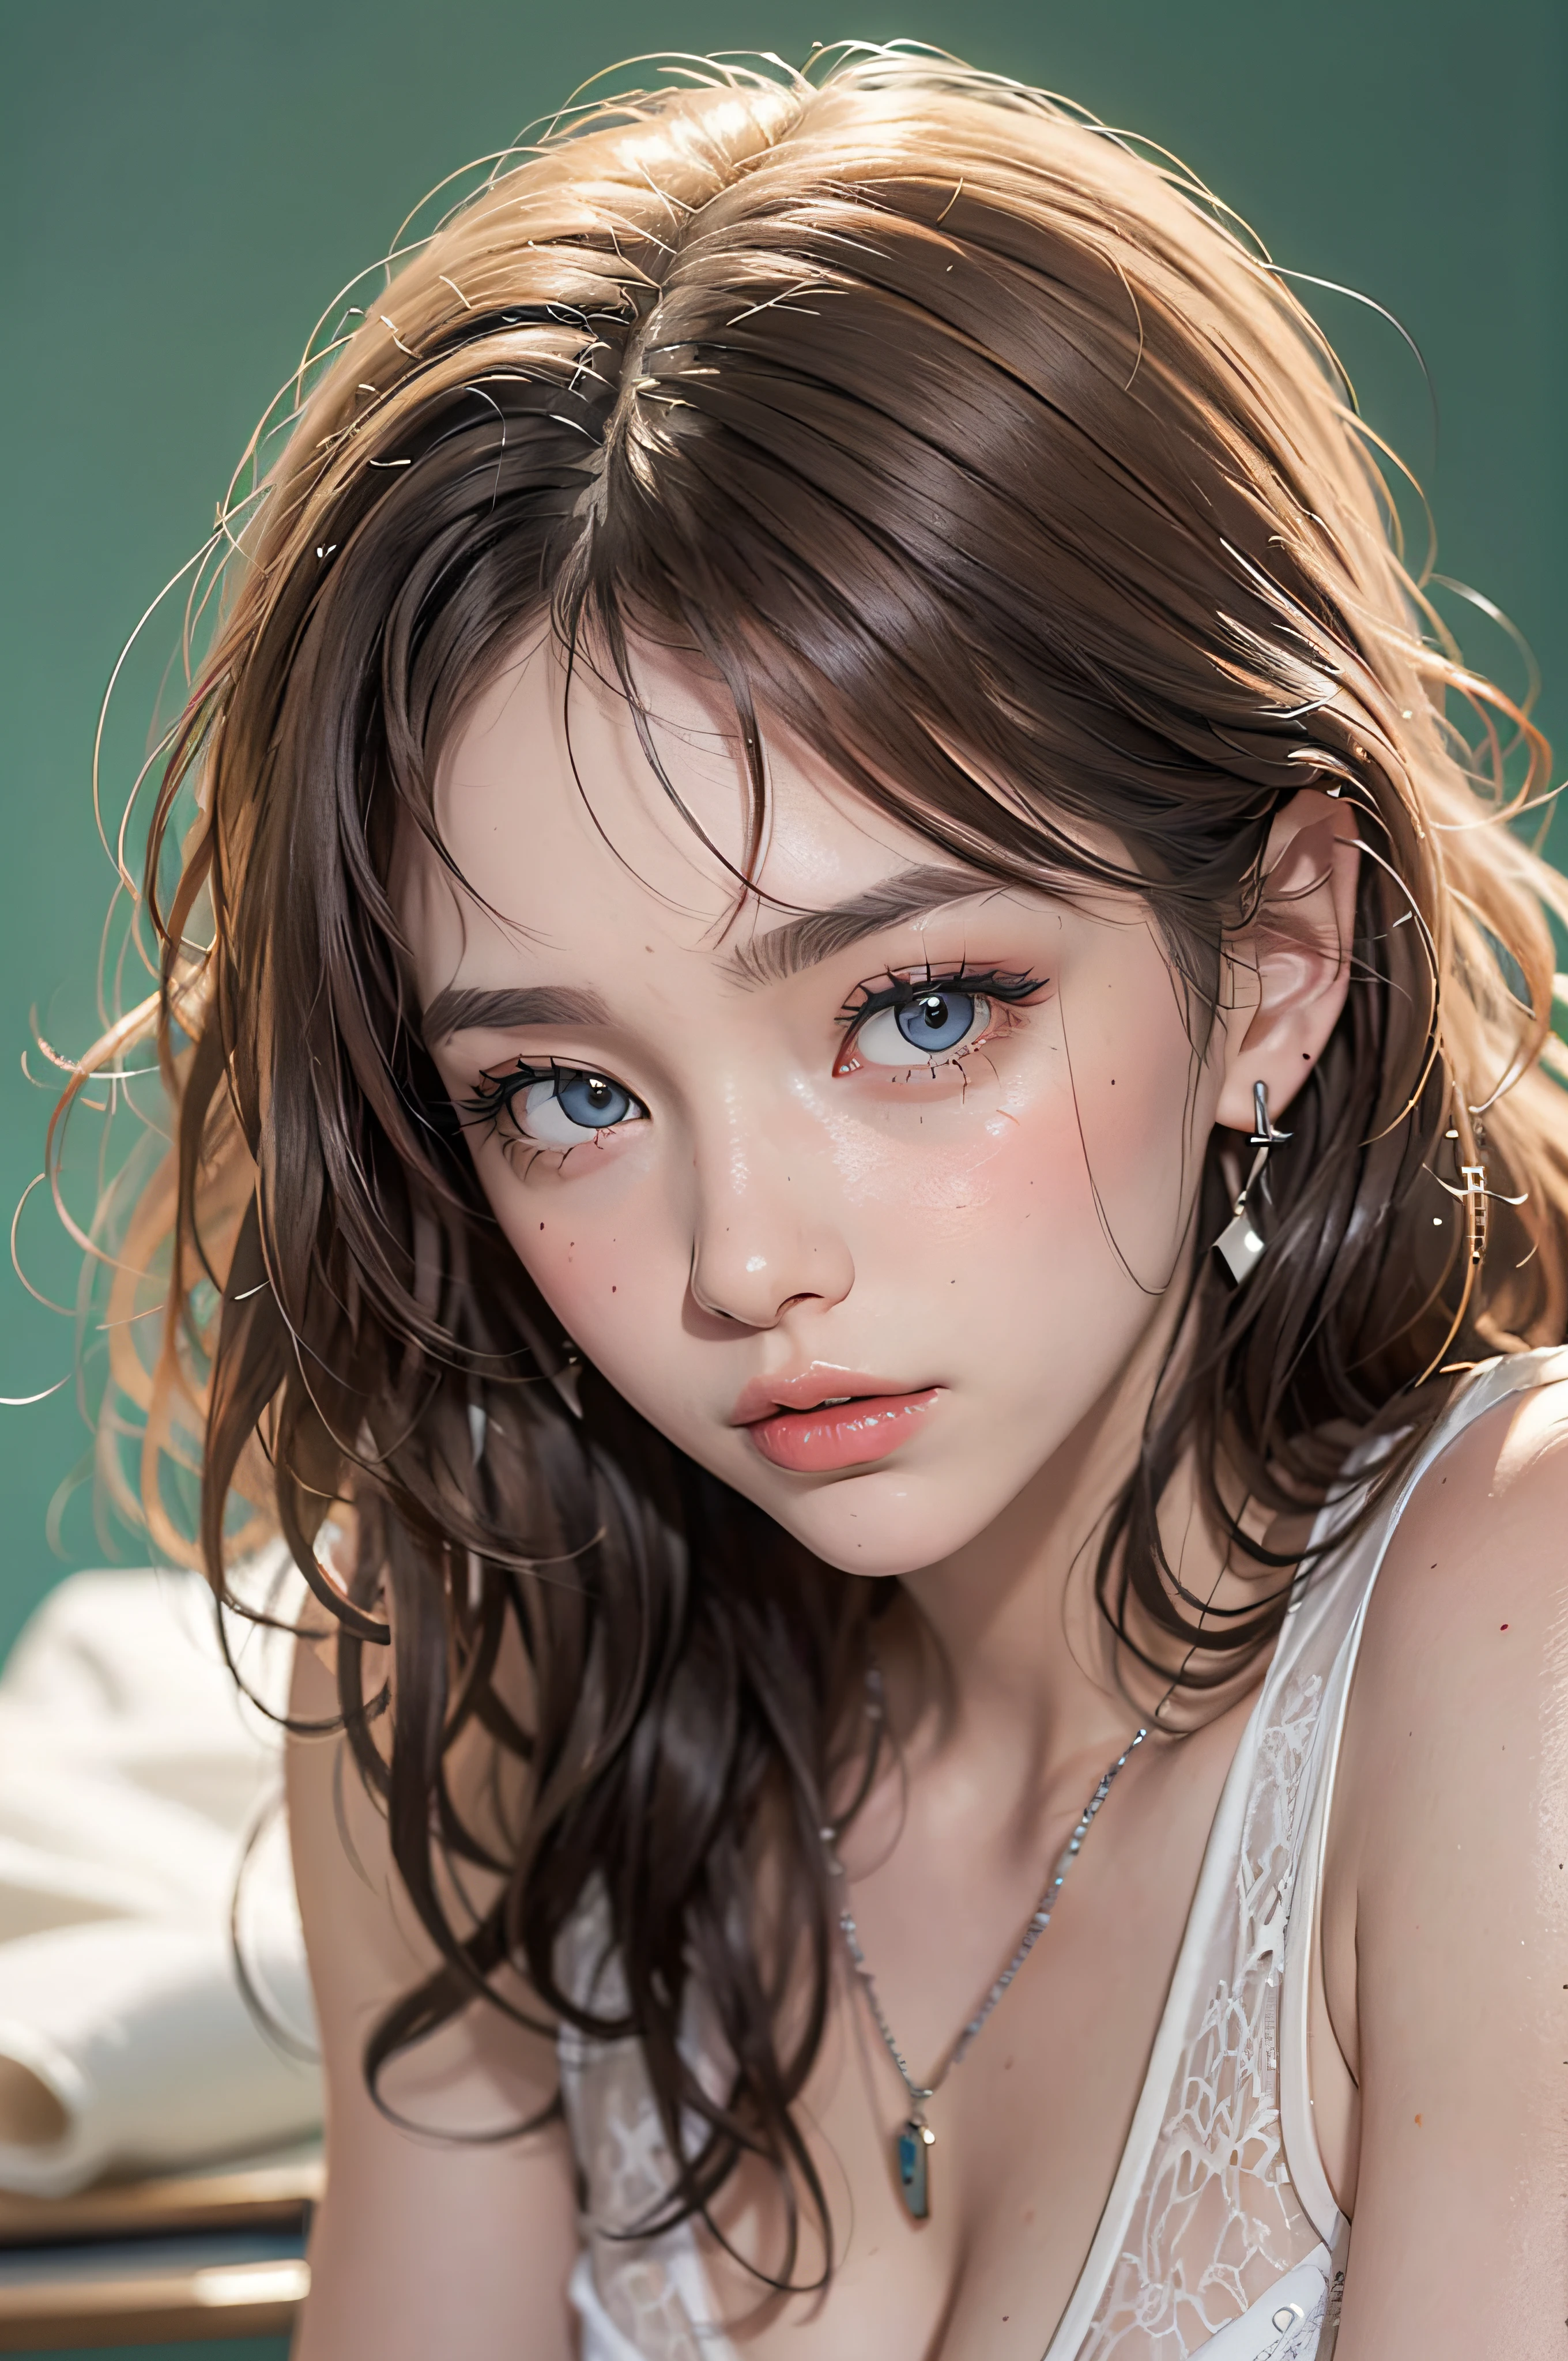 (masutepiece: 1.3), (max resolution: 1.2), (Ultra HDTV: 1.2), cinematric light, 8K resolution, Detailed eyes and skin, detailed facial features, , (Sharp Focus: 1.2）, (Focus on Face:1.2),Perfect Style, Beautiful face, acurate, Anatomically correct, Highly detailed face and skin texture, Detailed eyes, Double eyelids, Thin eyebrows, Glitter Eyeliner: 1 Natural cheeks, Glossy skin, Fair skin: 1.2, (Glossy lips: 1.4),、 (Shy look: 1.2),Highly detailed facial and skin texture, Detailed eyes, Double eyelids, Natural cheeks, , shiny lips: 1.4,Exposed cleavage、（A large amount of sperm in the chest:1.4）（Large amount of sperm in the thighs:1.2）、 red blush、humiliated、impatience、dismay、Frightened、glares、Tears、embarrassed from、Open knees、open one's legasturbation behavior、masturbation、rubbing the genitals with fingers,,,,,,,,,、 White underwear、White bra、Shiny little earrings and necklaces、、Disheveled clothes、Dressing、Exposed panties、Wearing sweat、sodden、Sheer underwear、Full body like、 18year old, Neat and clean woman 、Small breasts, upturned breasts,Sitting at a desk, ‎Classroom、Blue ash eyes,(hi-school girl:1.6)、